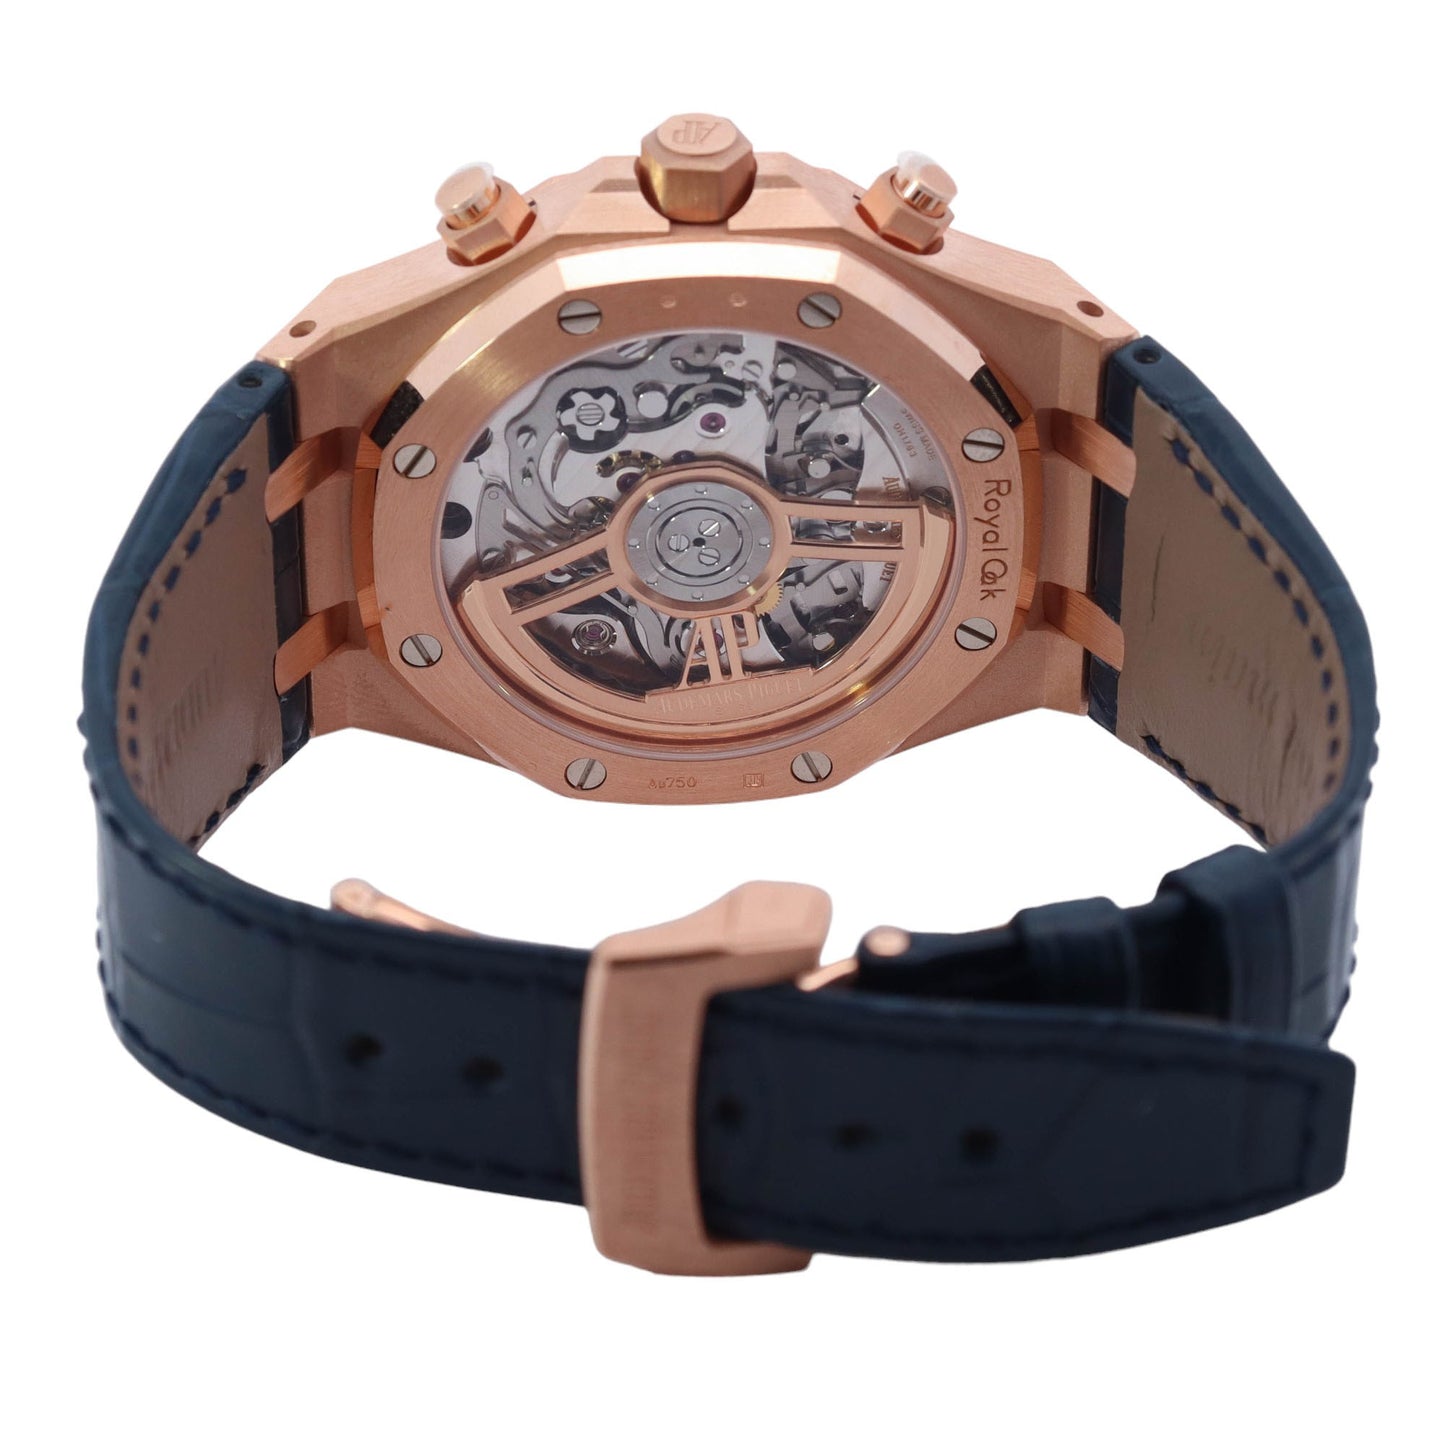 Audemars Piguet Royal Oak 41mm Rose Gold Blue Chronograph Dial Watch Reference# 26240OR.OO.D315CR.02 - Happy Jewelers Fine Jewelry Lifetime Warranty